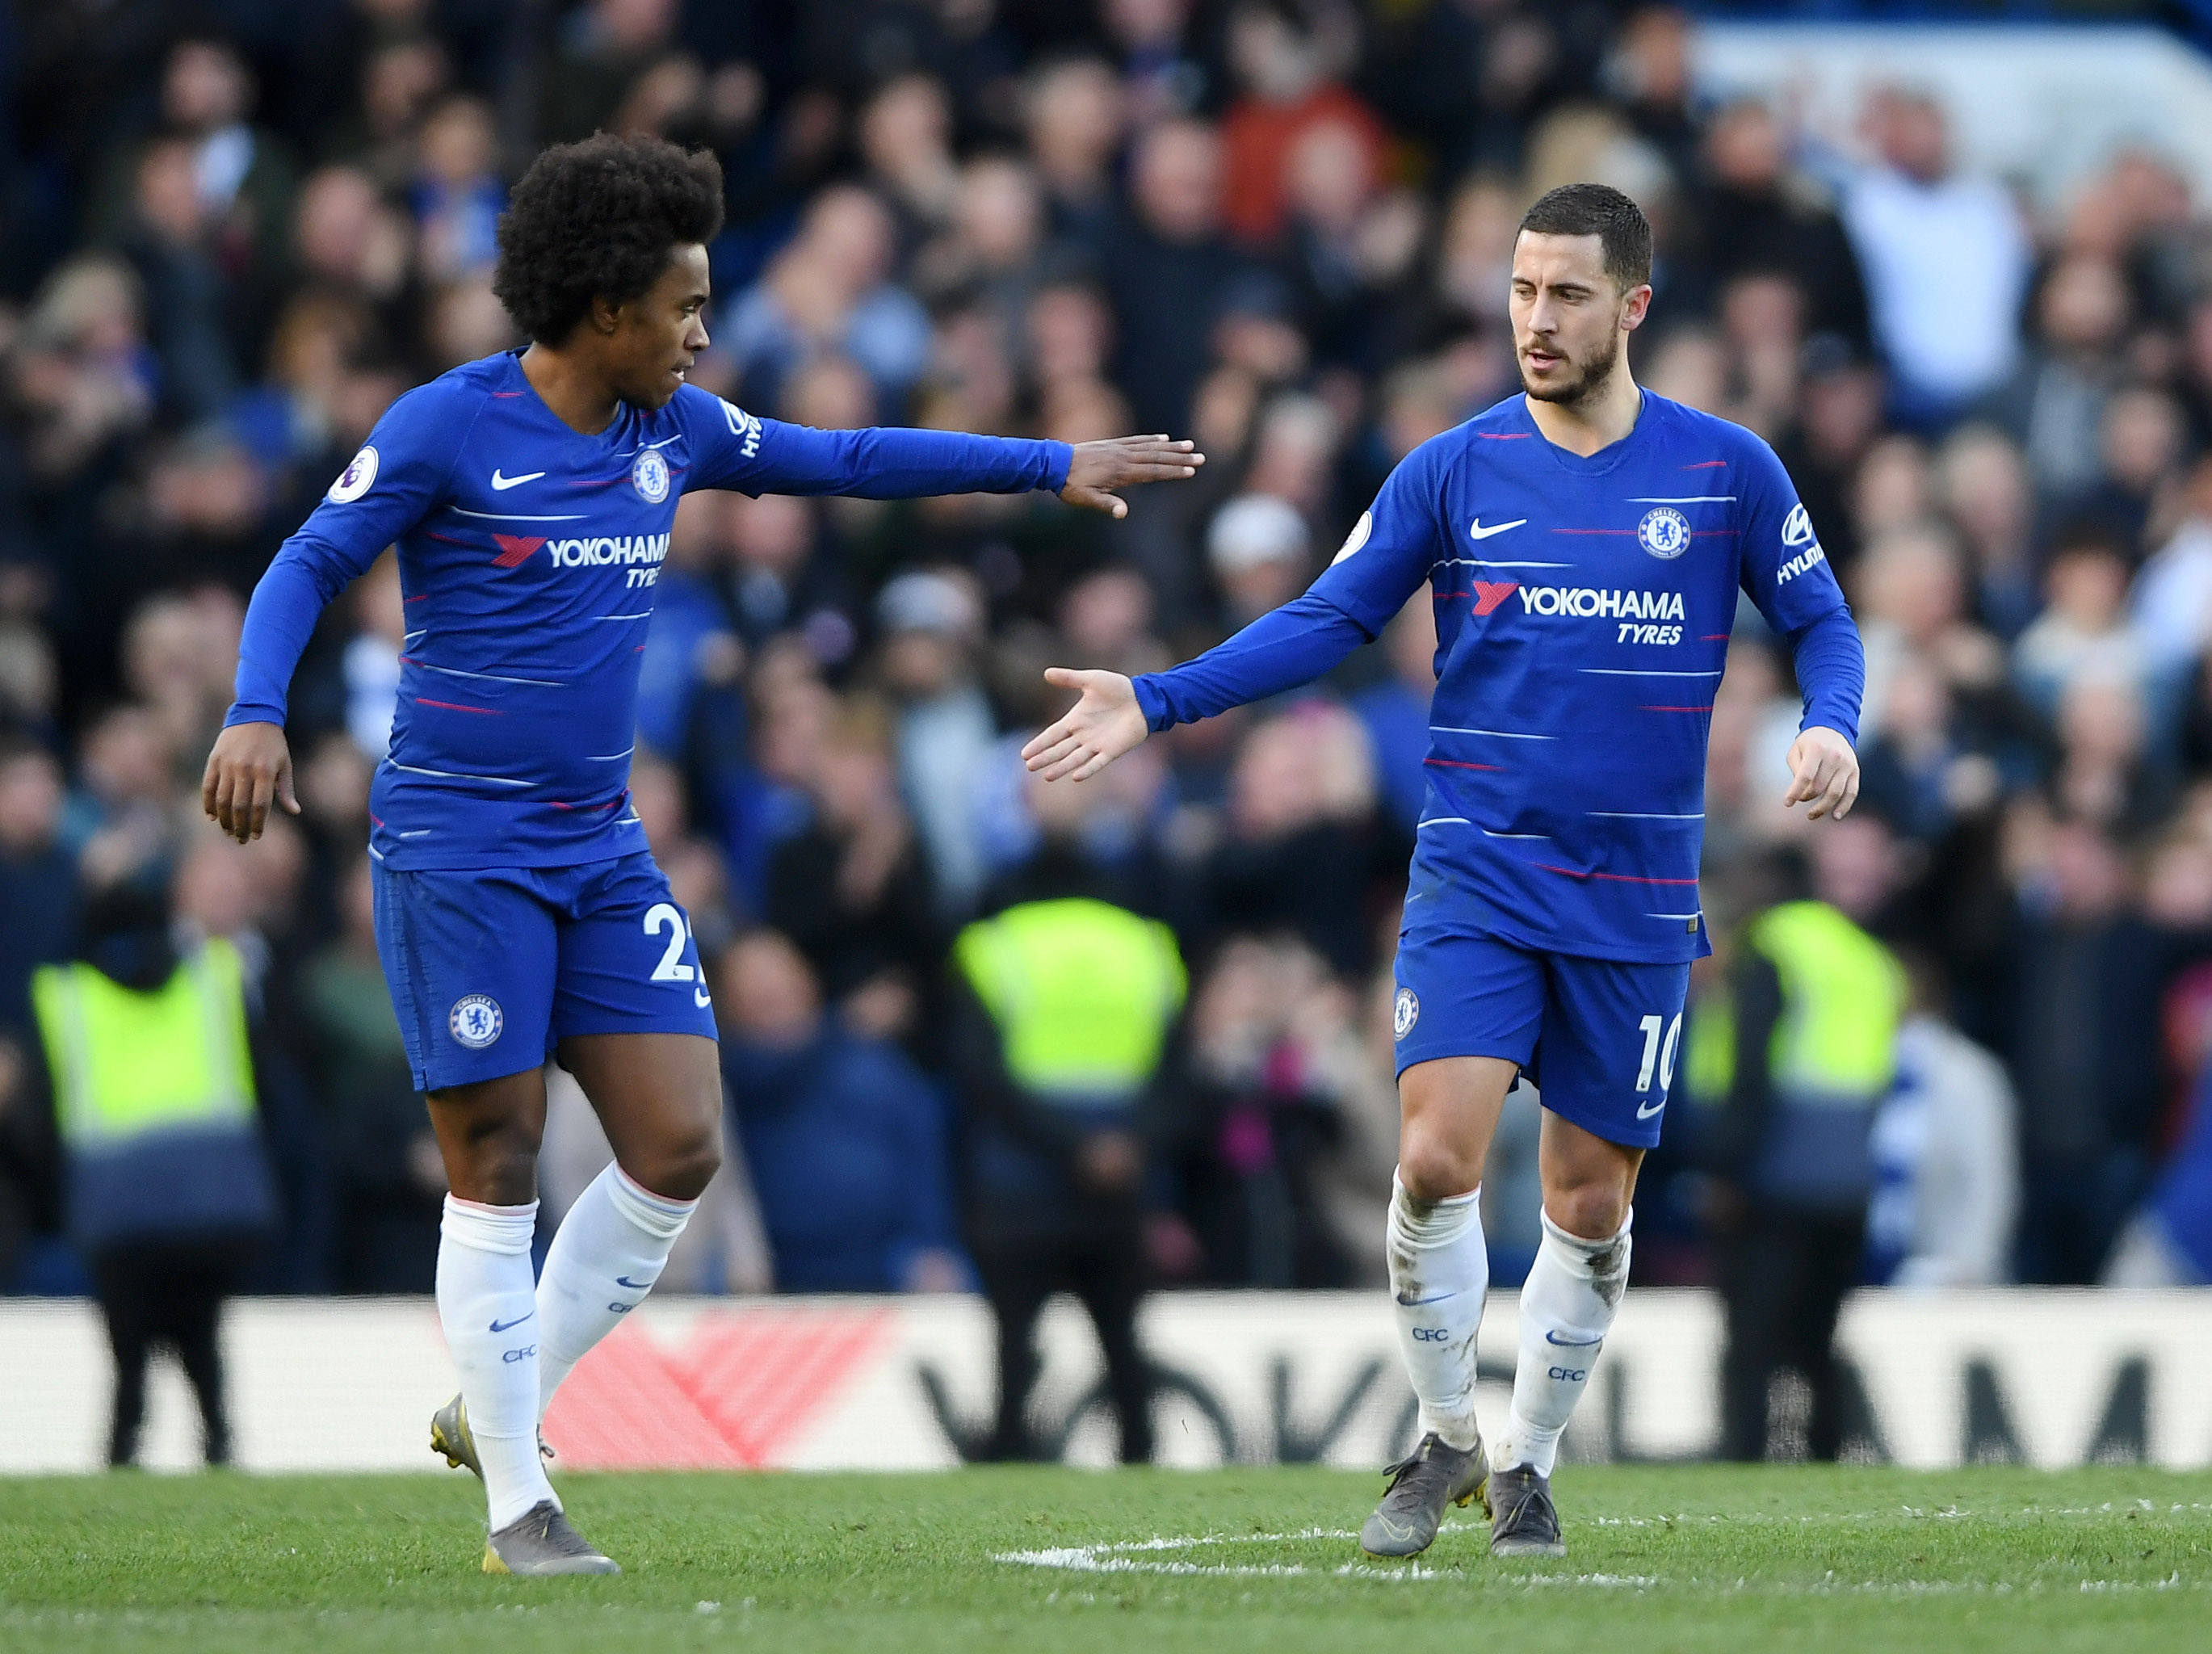 LONDON, ENGLAND - MARCH 10: Eden Hazard of Chelsea is congratulated by teammate Willian of Chelsea after scoring his team's first goal during the Premier League match between Chelsea FC and Wolverhampton Wanderers at Stamford Bridge on March 10, 2019 in London, United Kingdom. (Photo by Mike Hewitt/Getty Images)